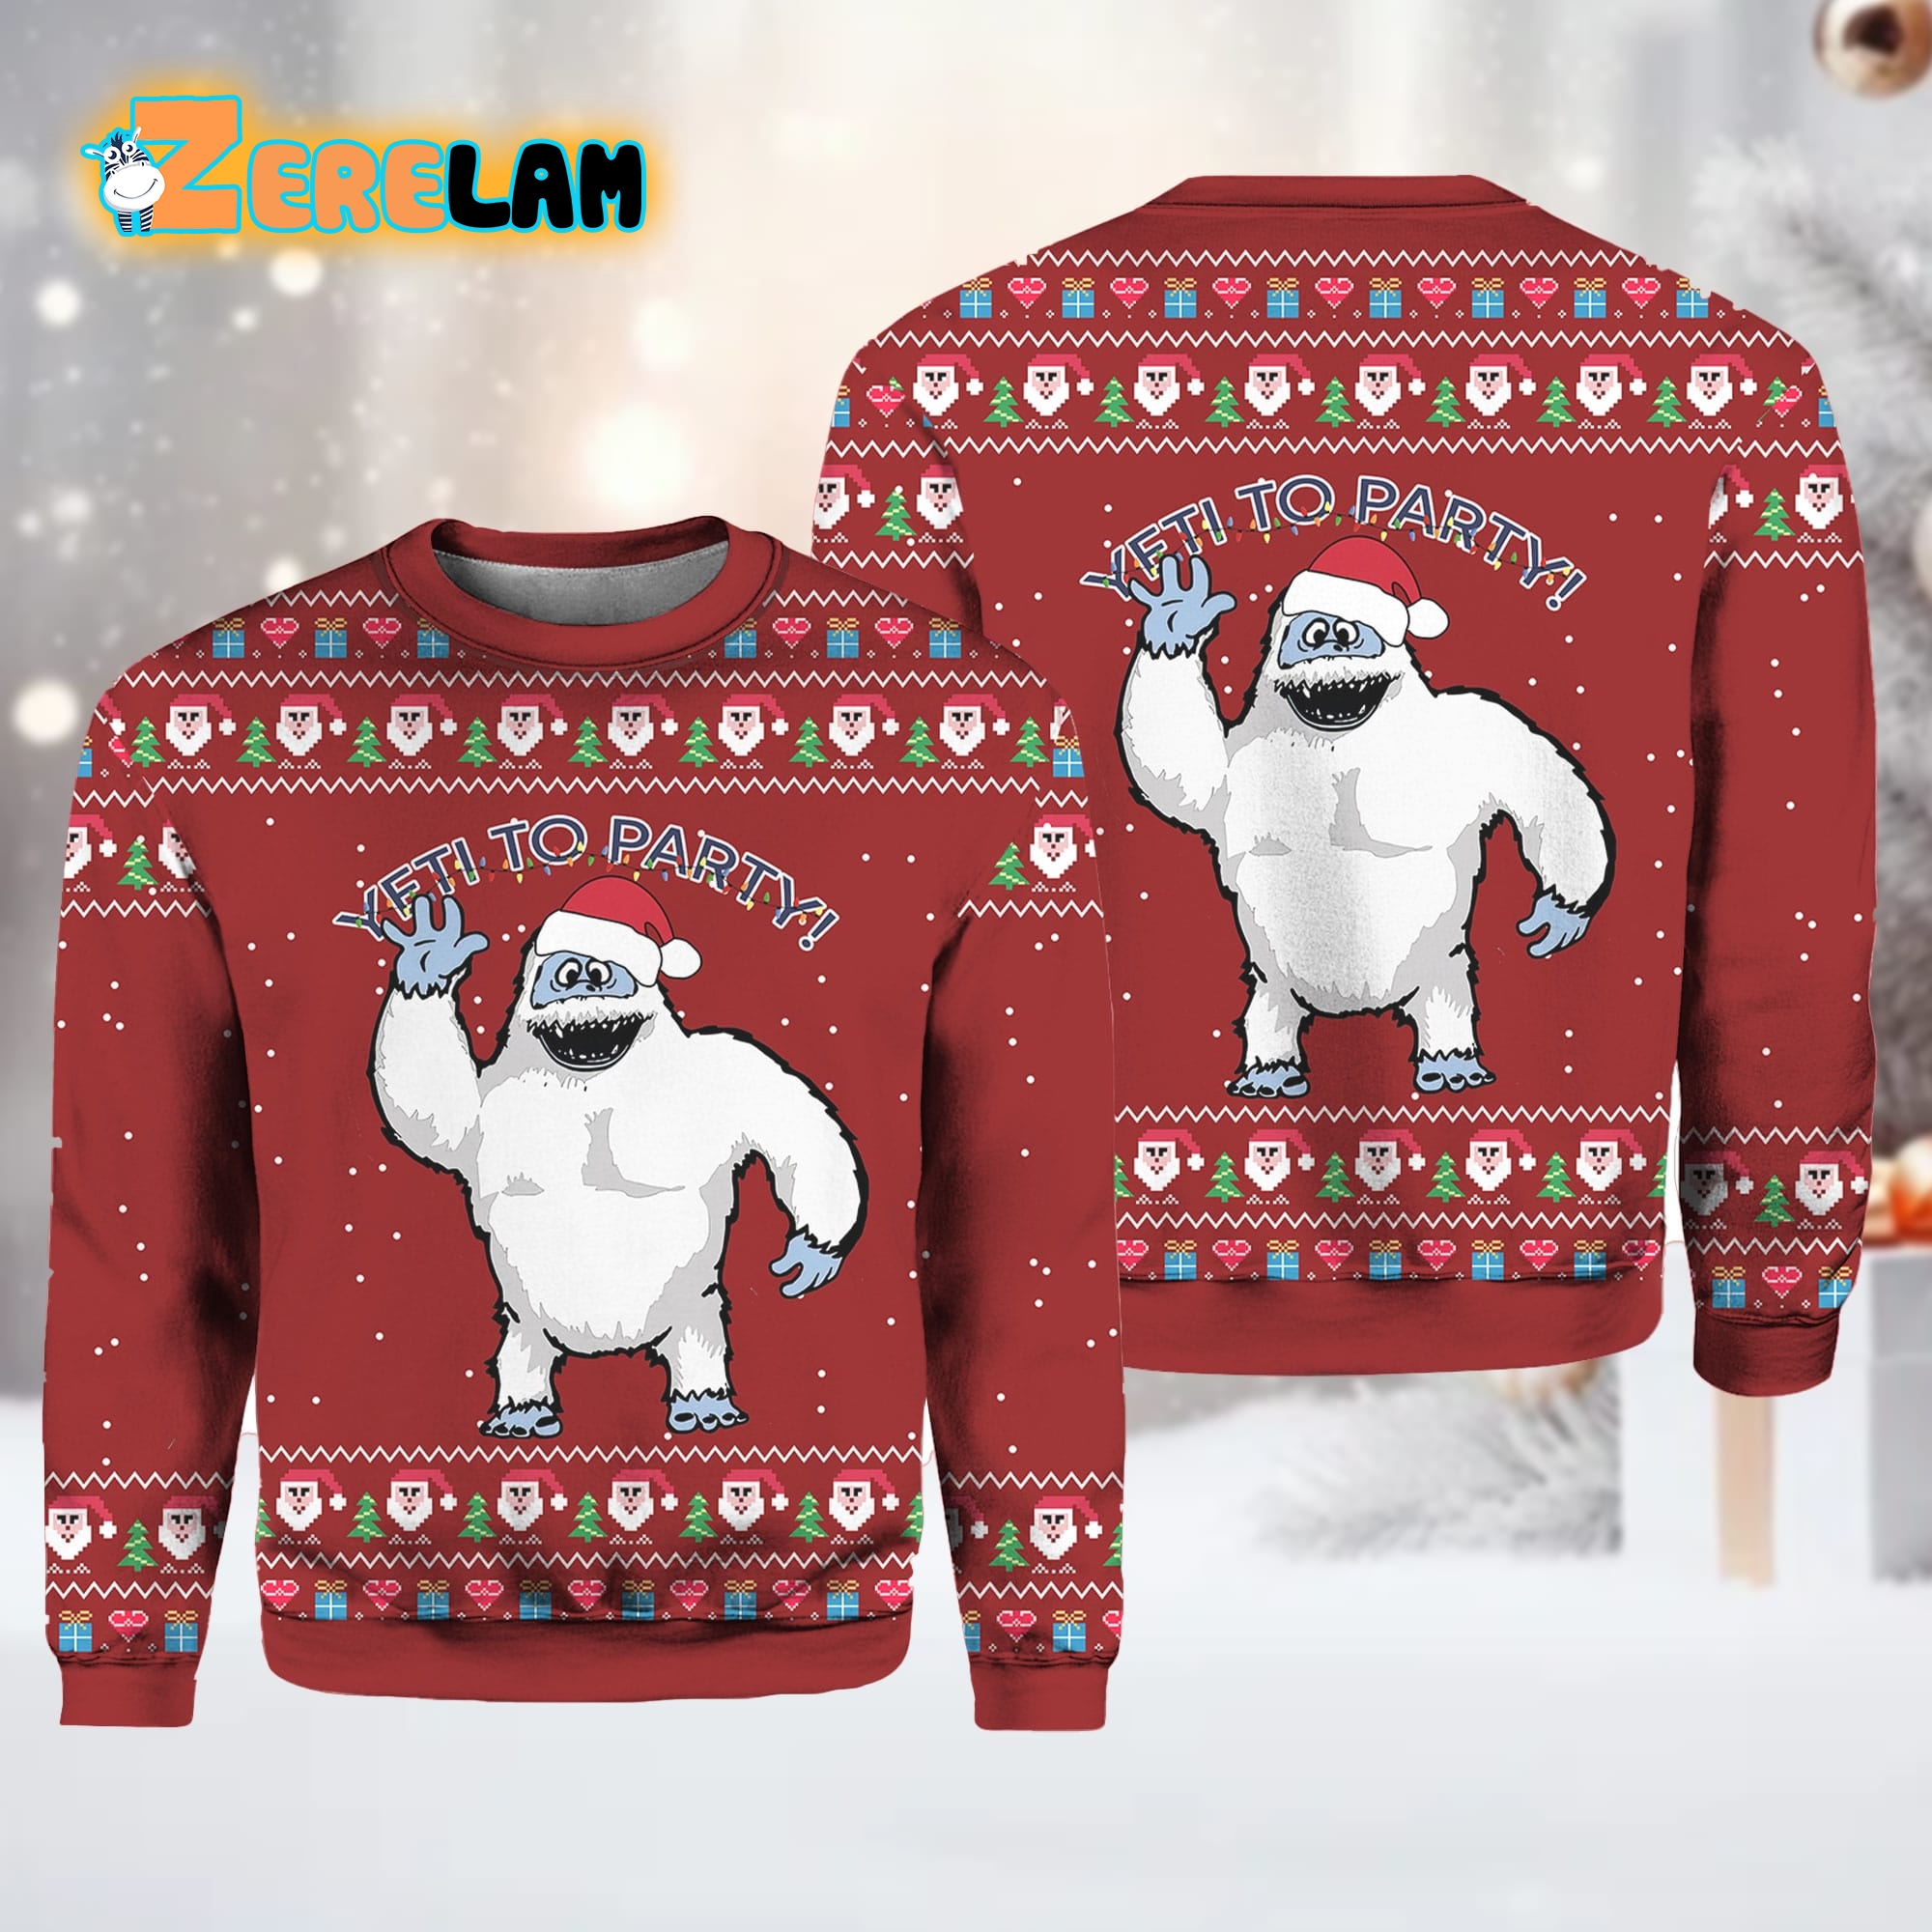 https://zerelam.com/wp-content/uploads/2024/01/Abominable-Snowman-Yeti-To-Party-Ugly-sweater.jpg